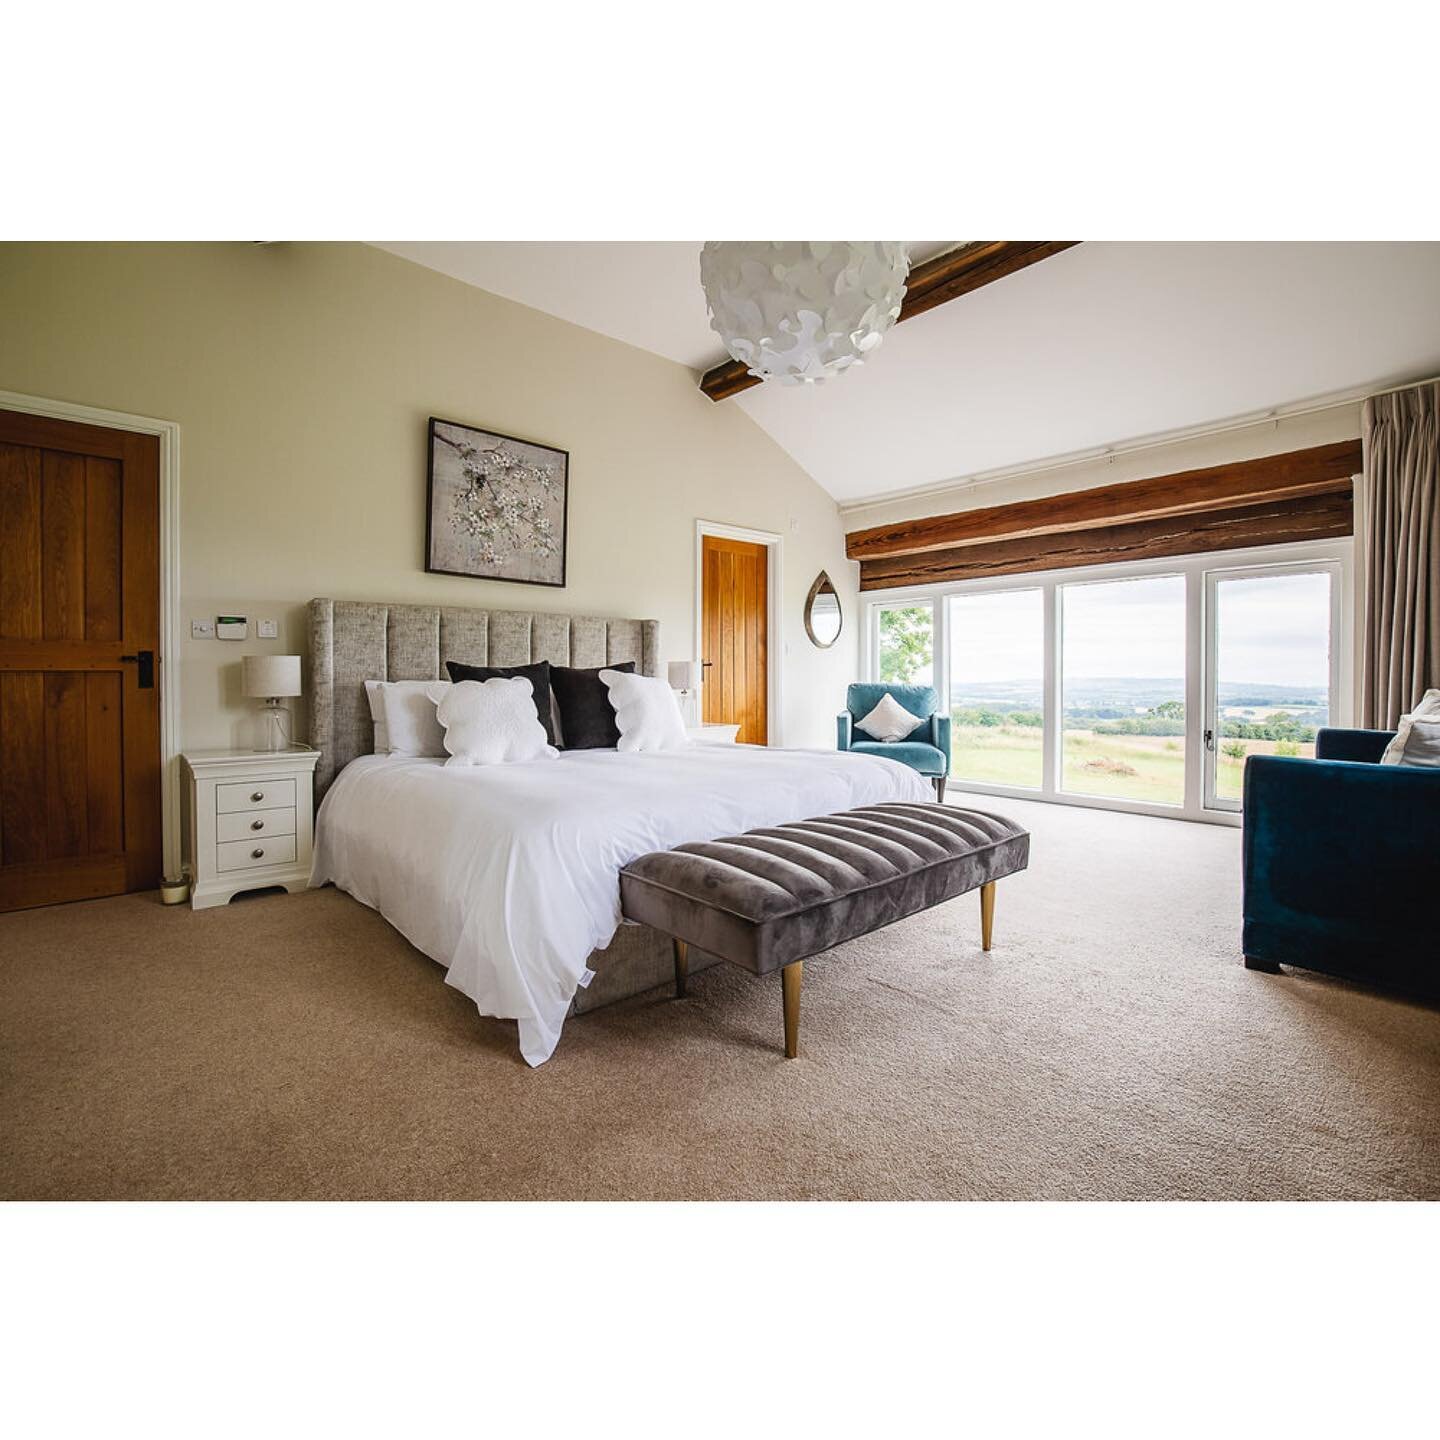 The views.  It is all about them from this luxurious #staycation.  Planning your next getaway? #summer2021 #cotswoldholidays #propertyphotography #propertyphotographer #cotswoldsphotographer #interiorsphotographer #interiorsphotography#sohofarmhouse 